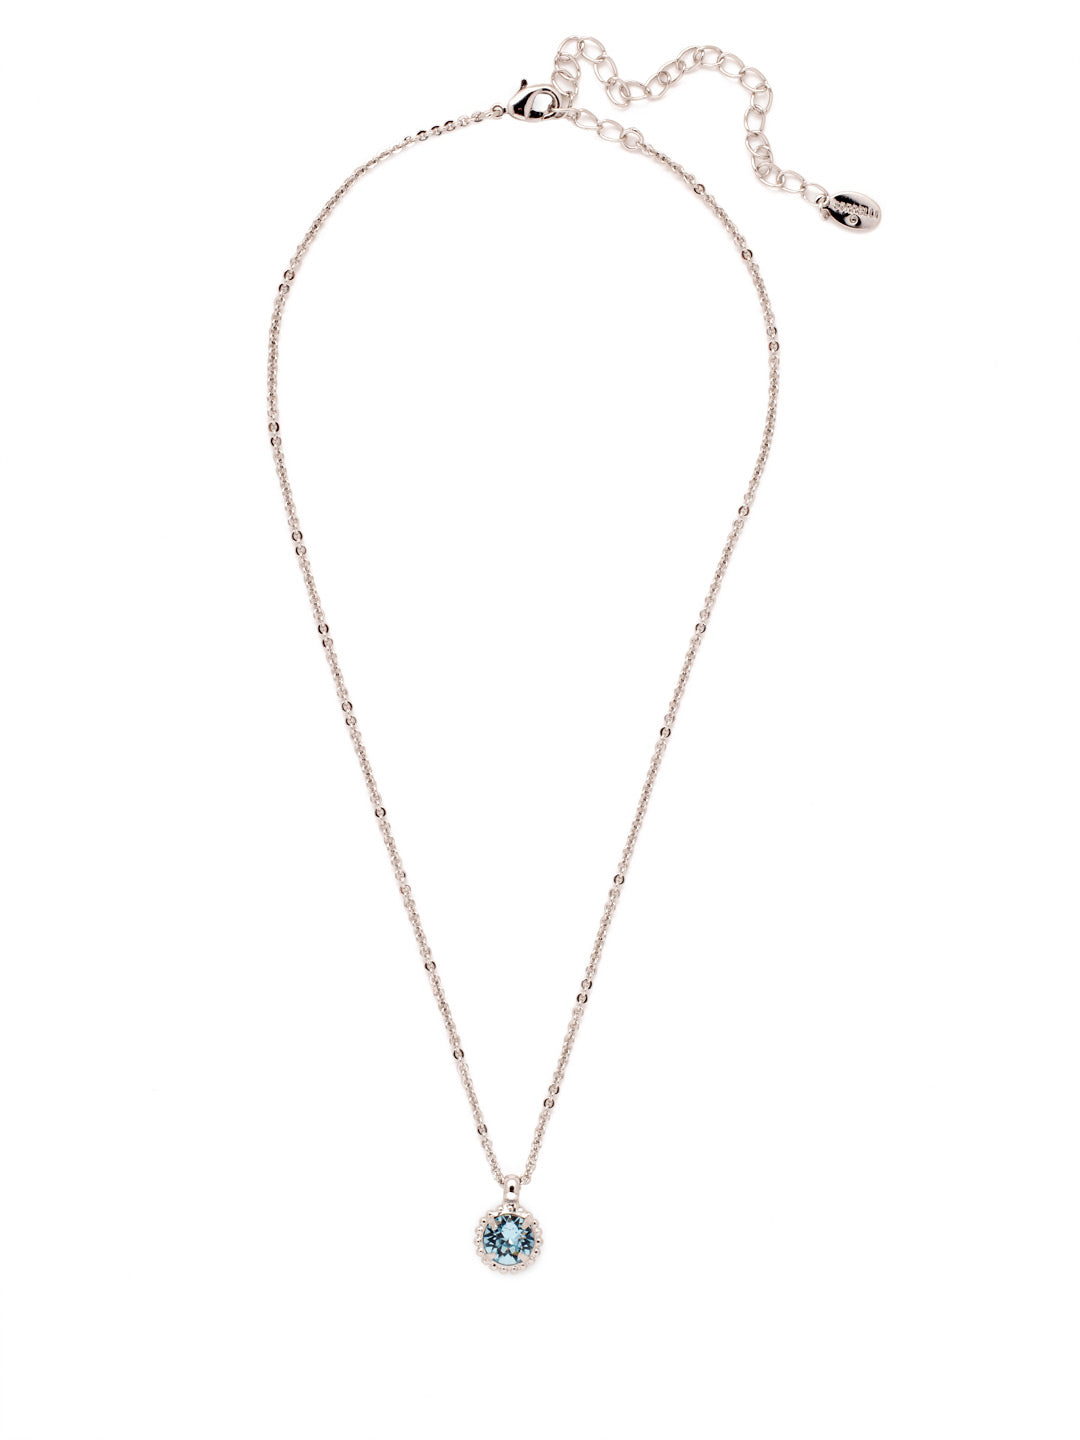 Simplicity Pendant Necklace - NBY38RHAQU - <p>Perfect for any day! The Simplicity Pendant Necklace features a round cut crystal with vintage edging. From Sorrelli's Aquamarine collection in our Palladium Silver-tone finish.</p>